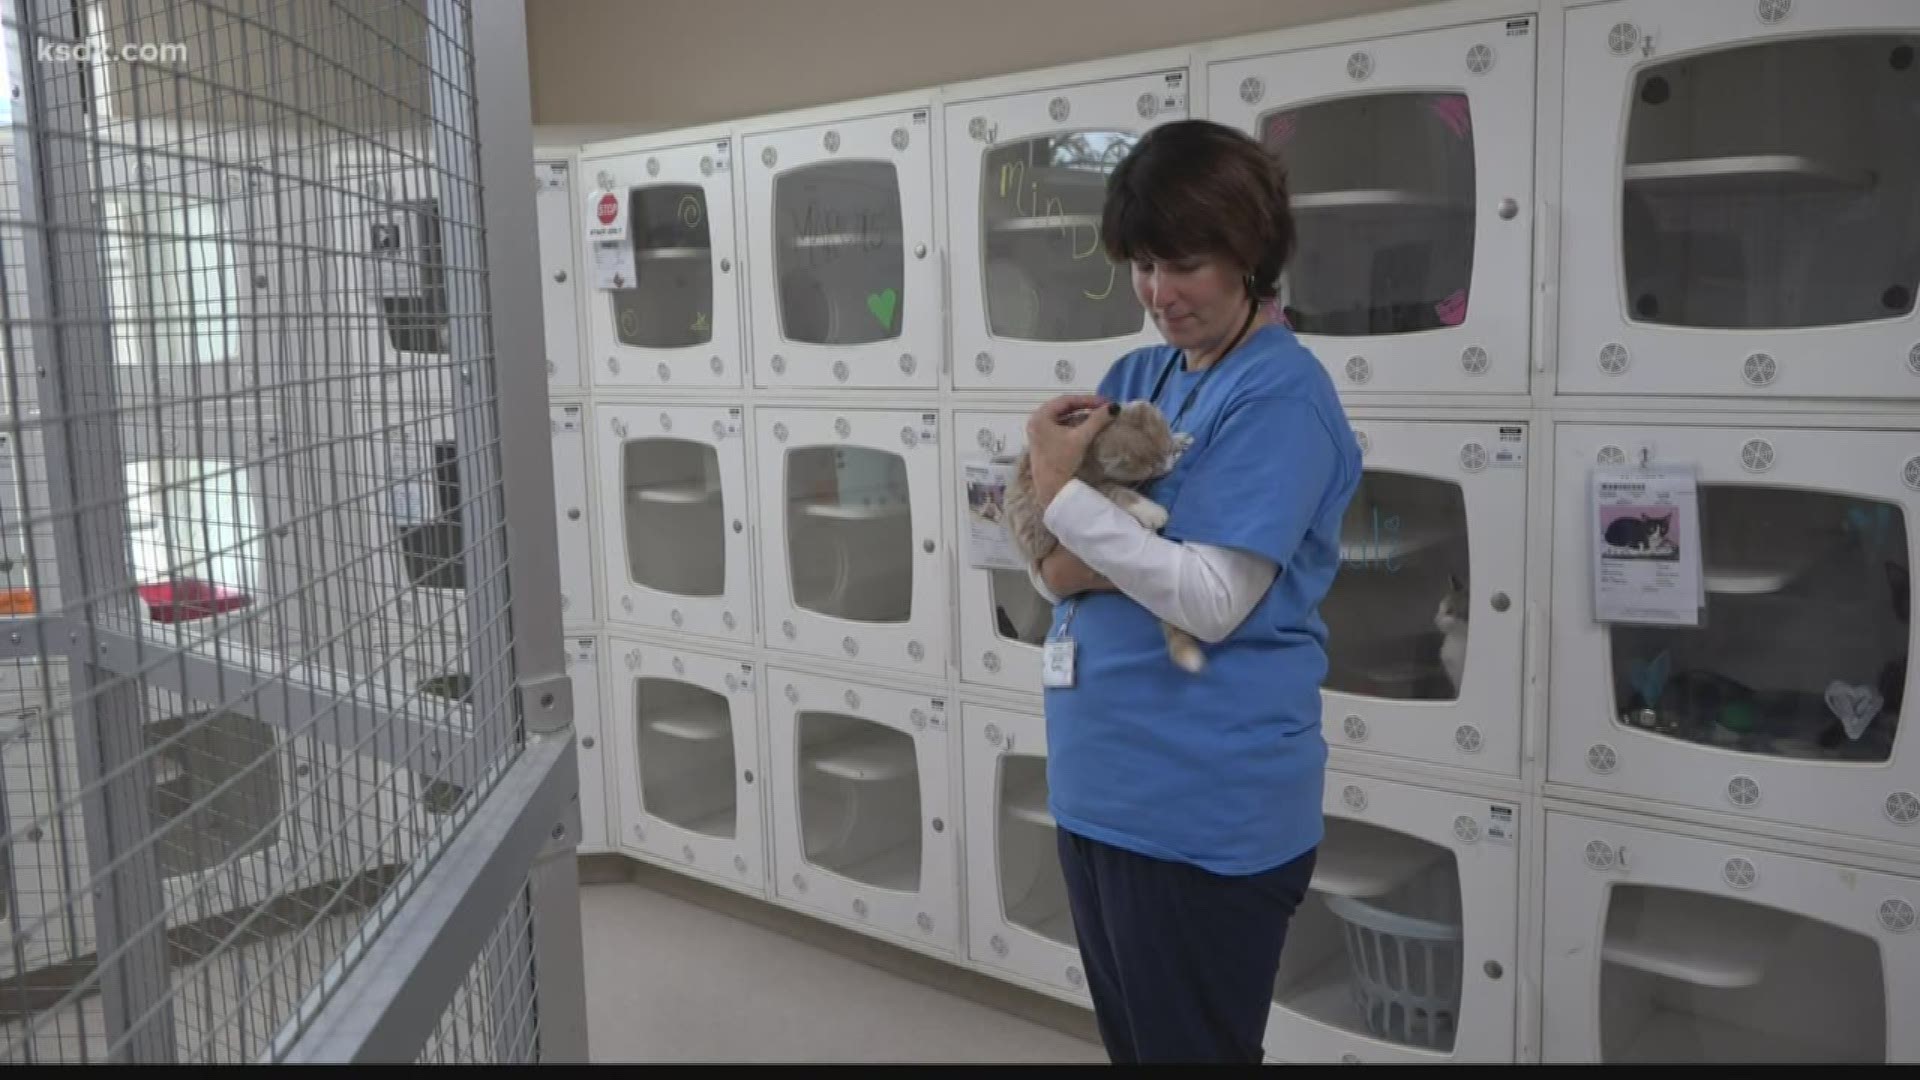 It's business as usual at the St. Louis County Pet Adoption Center, even as the shelter is revamping its volunteer program.